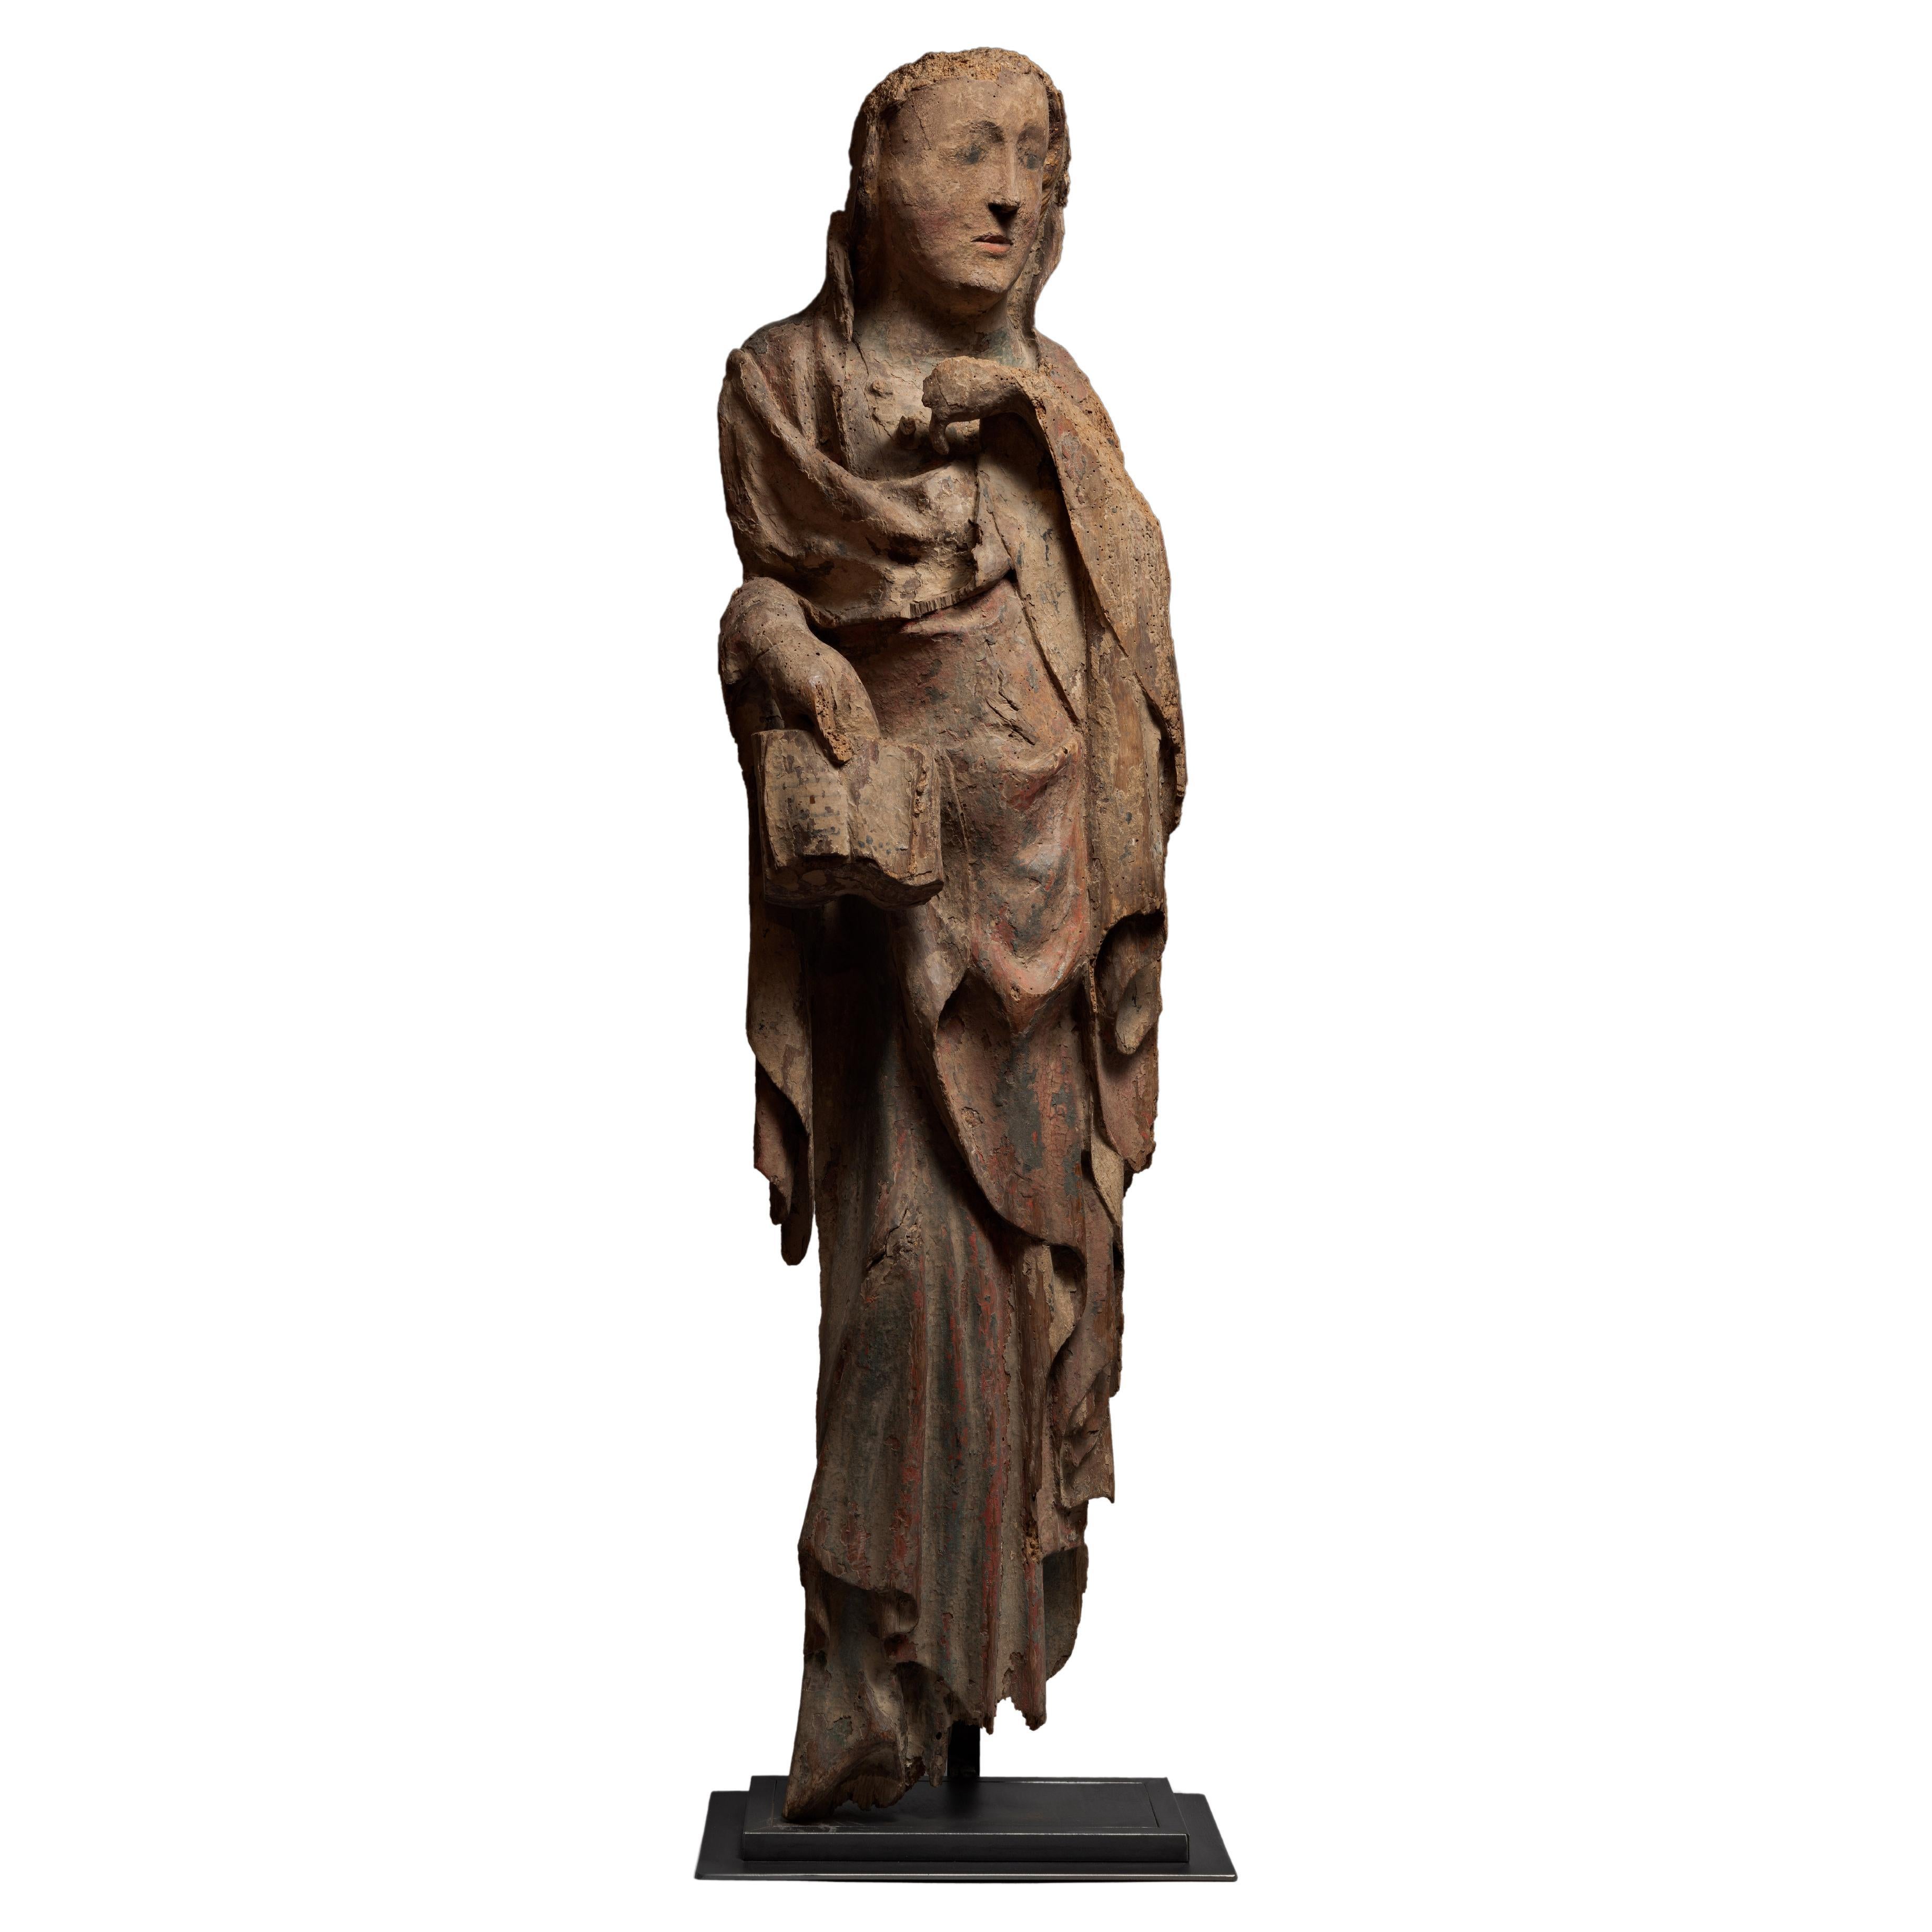 Saint Woman in polychrome carved wood